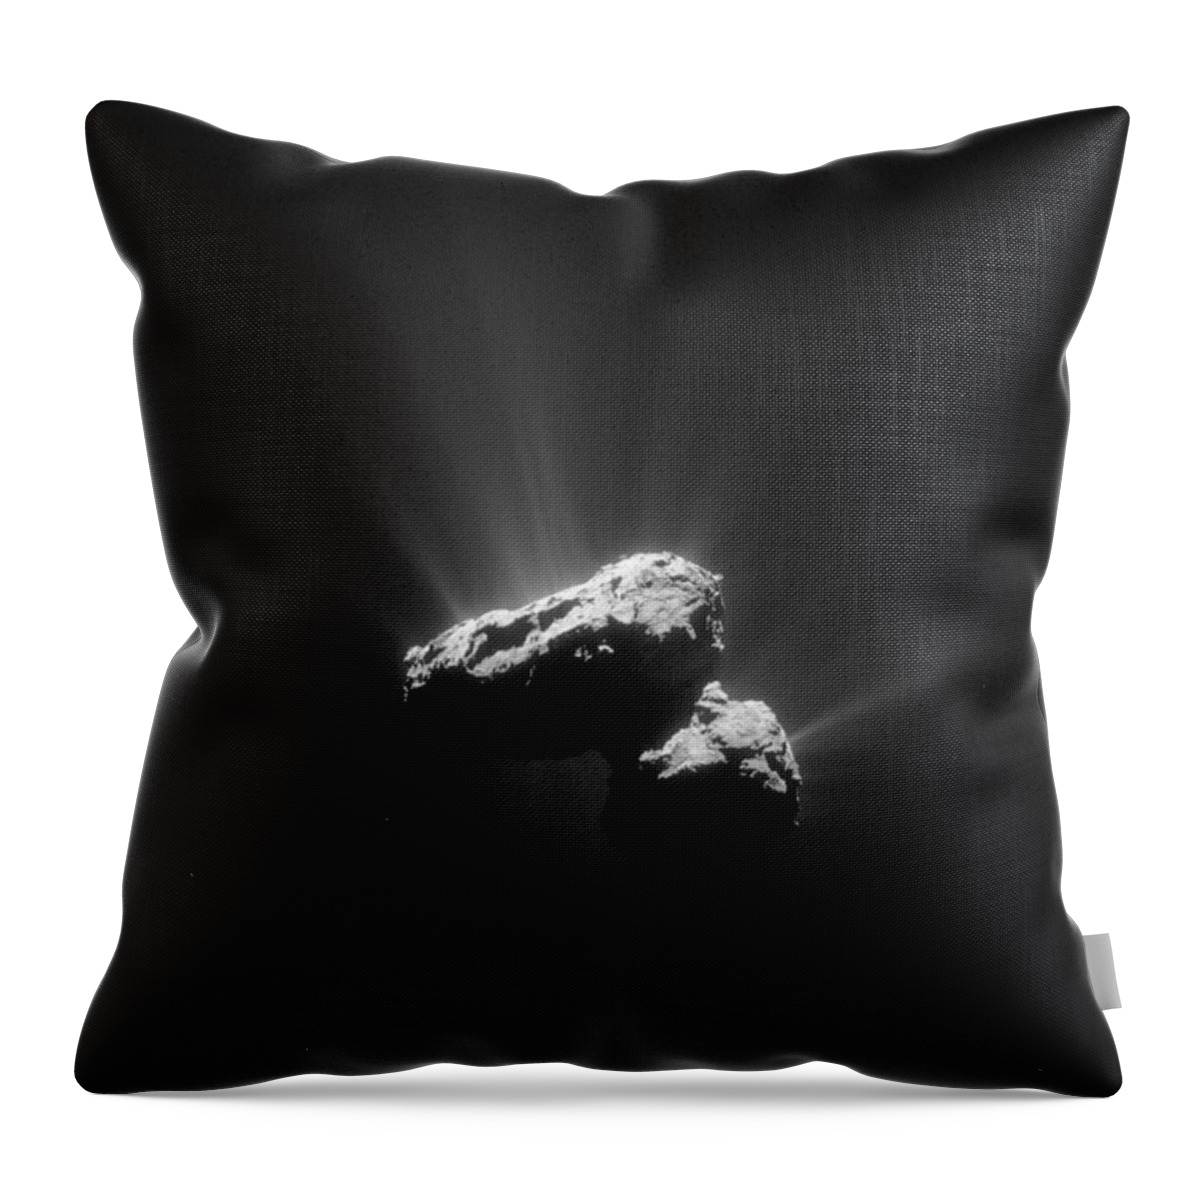 Comet Throw Pillow featuring the photograph Comet 67pchuryumov-gerasimenko #1 by Science Source